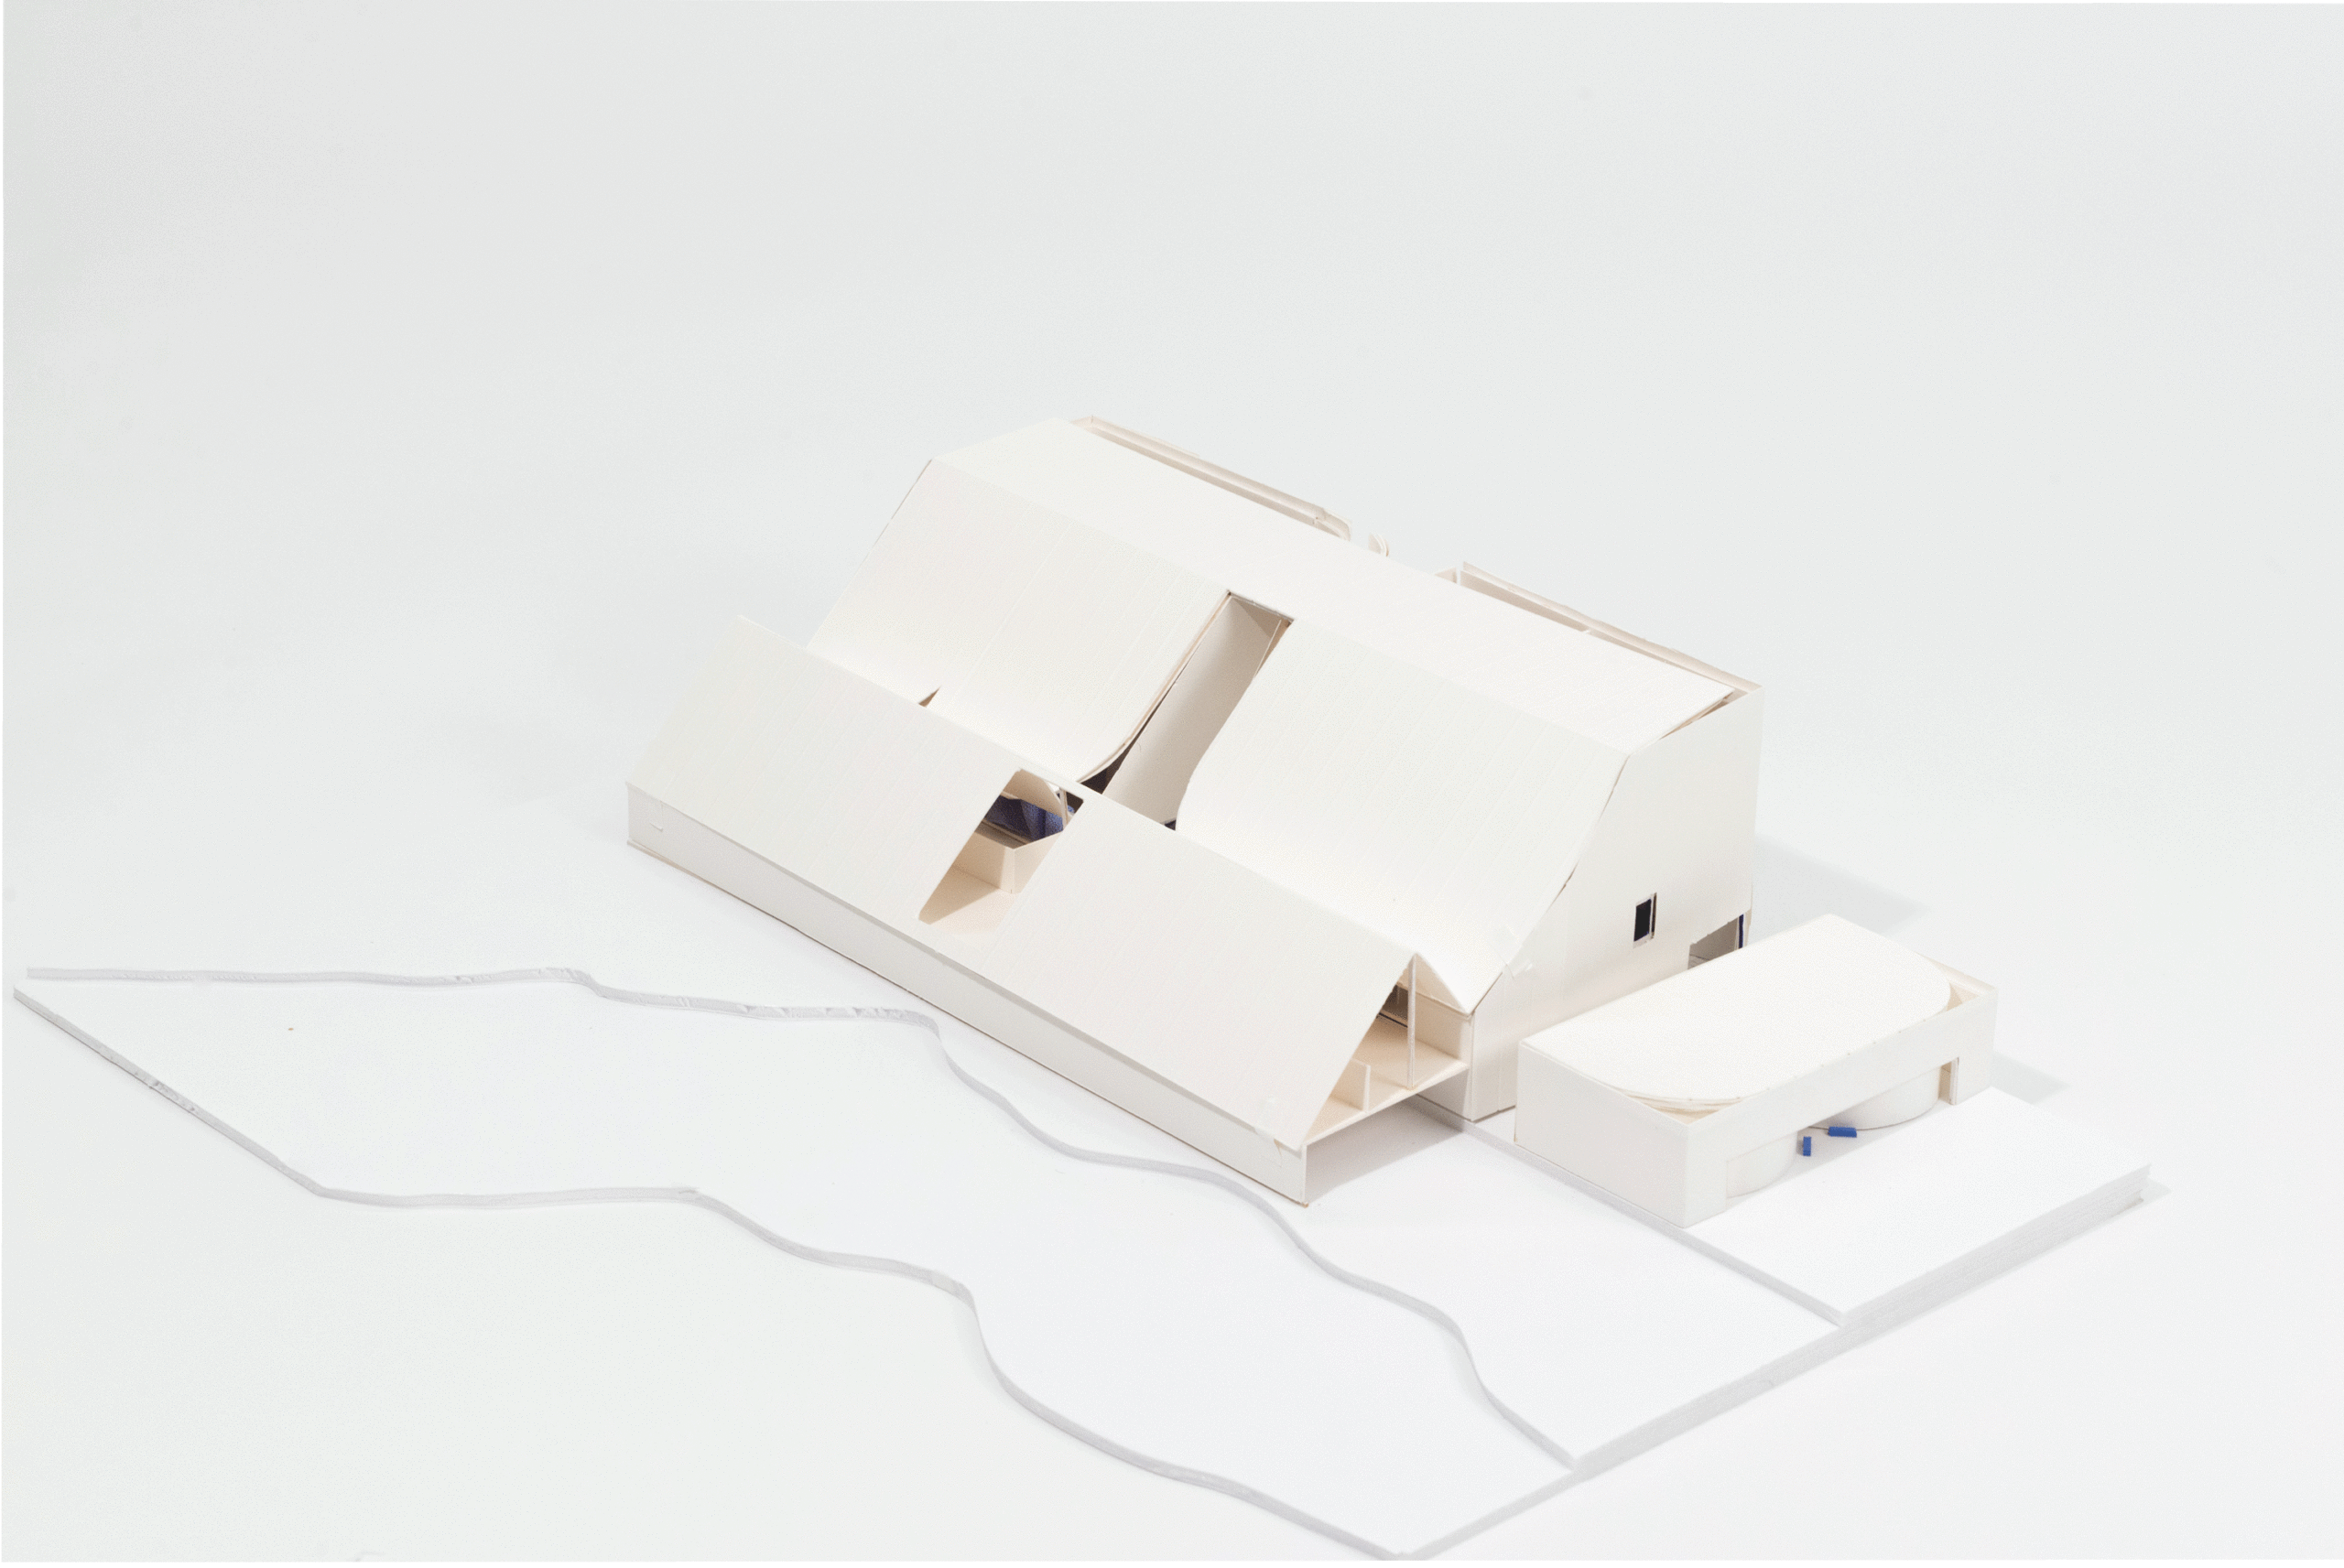 axo view of architecture model